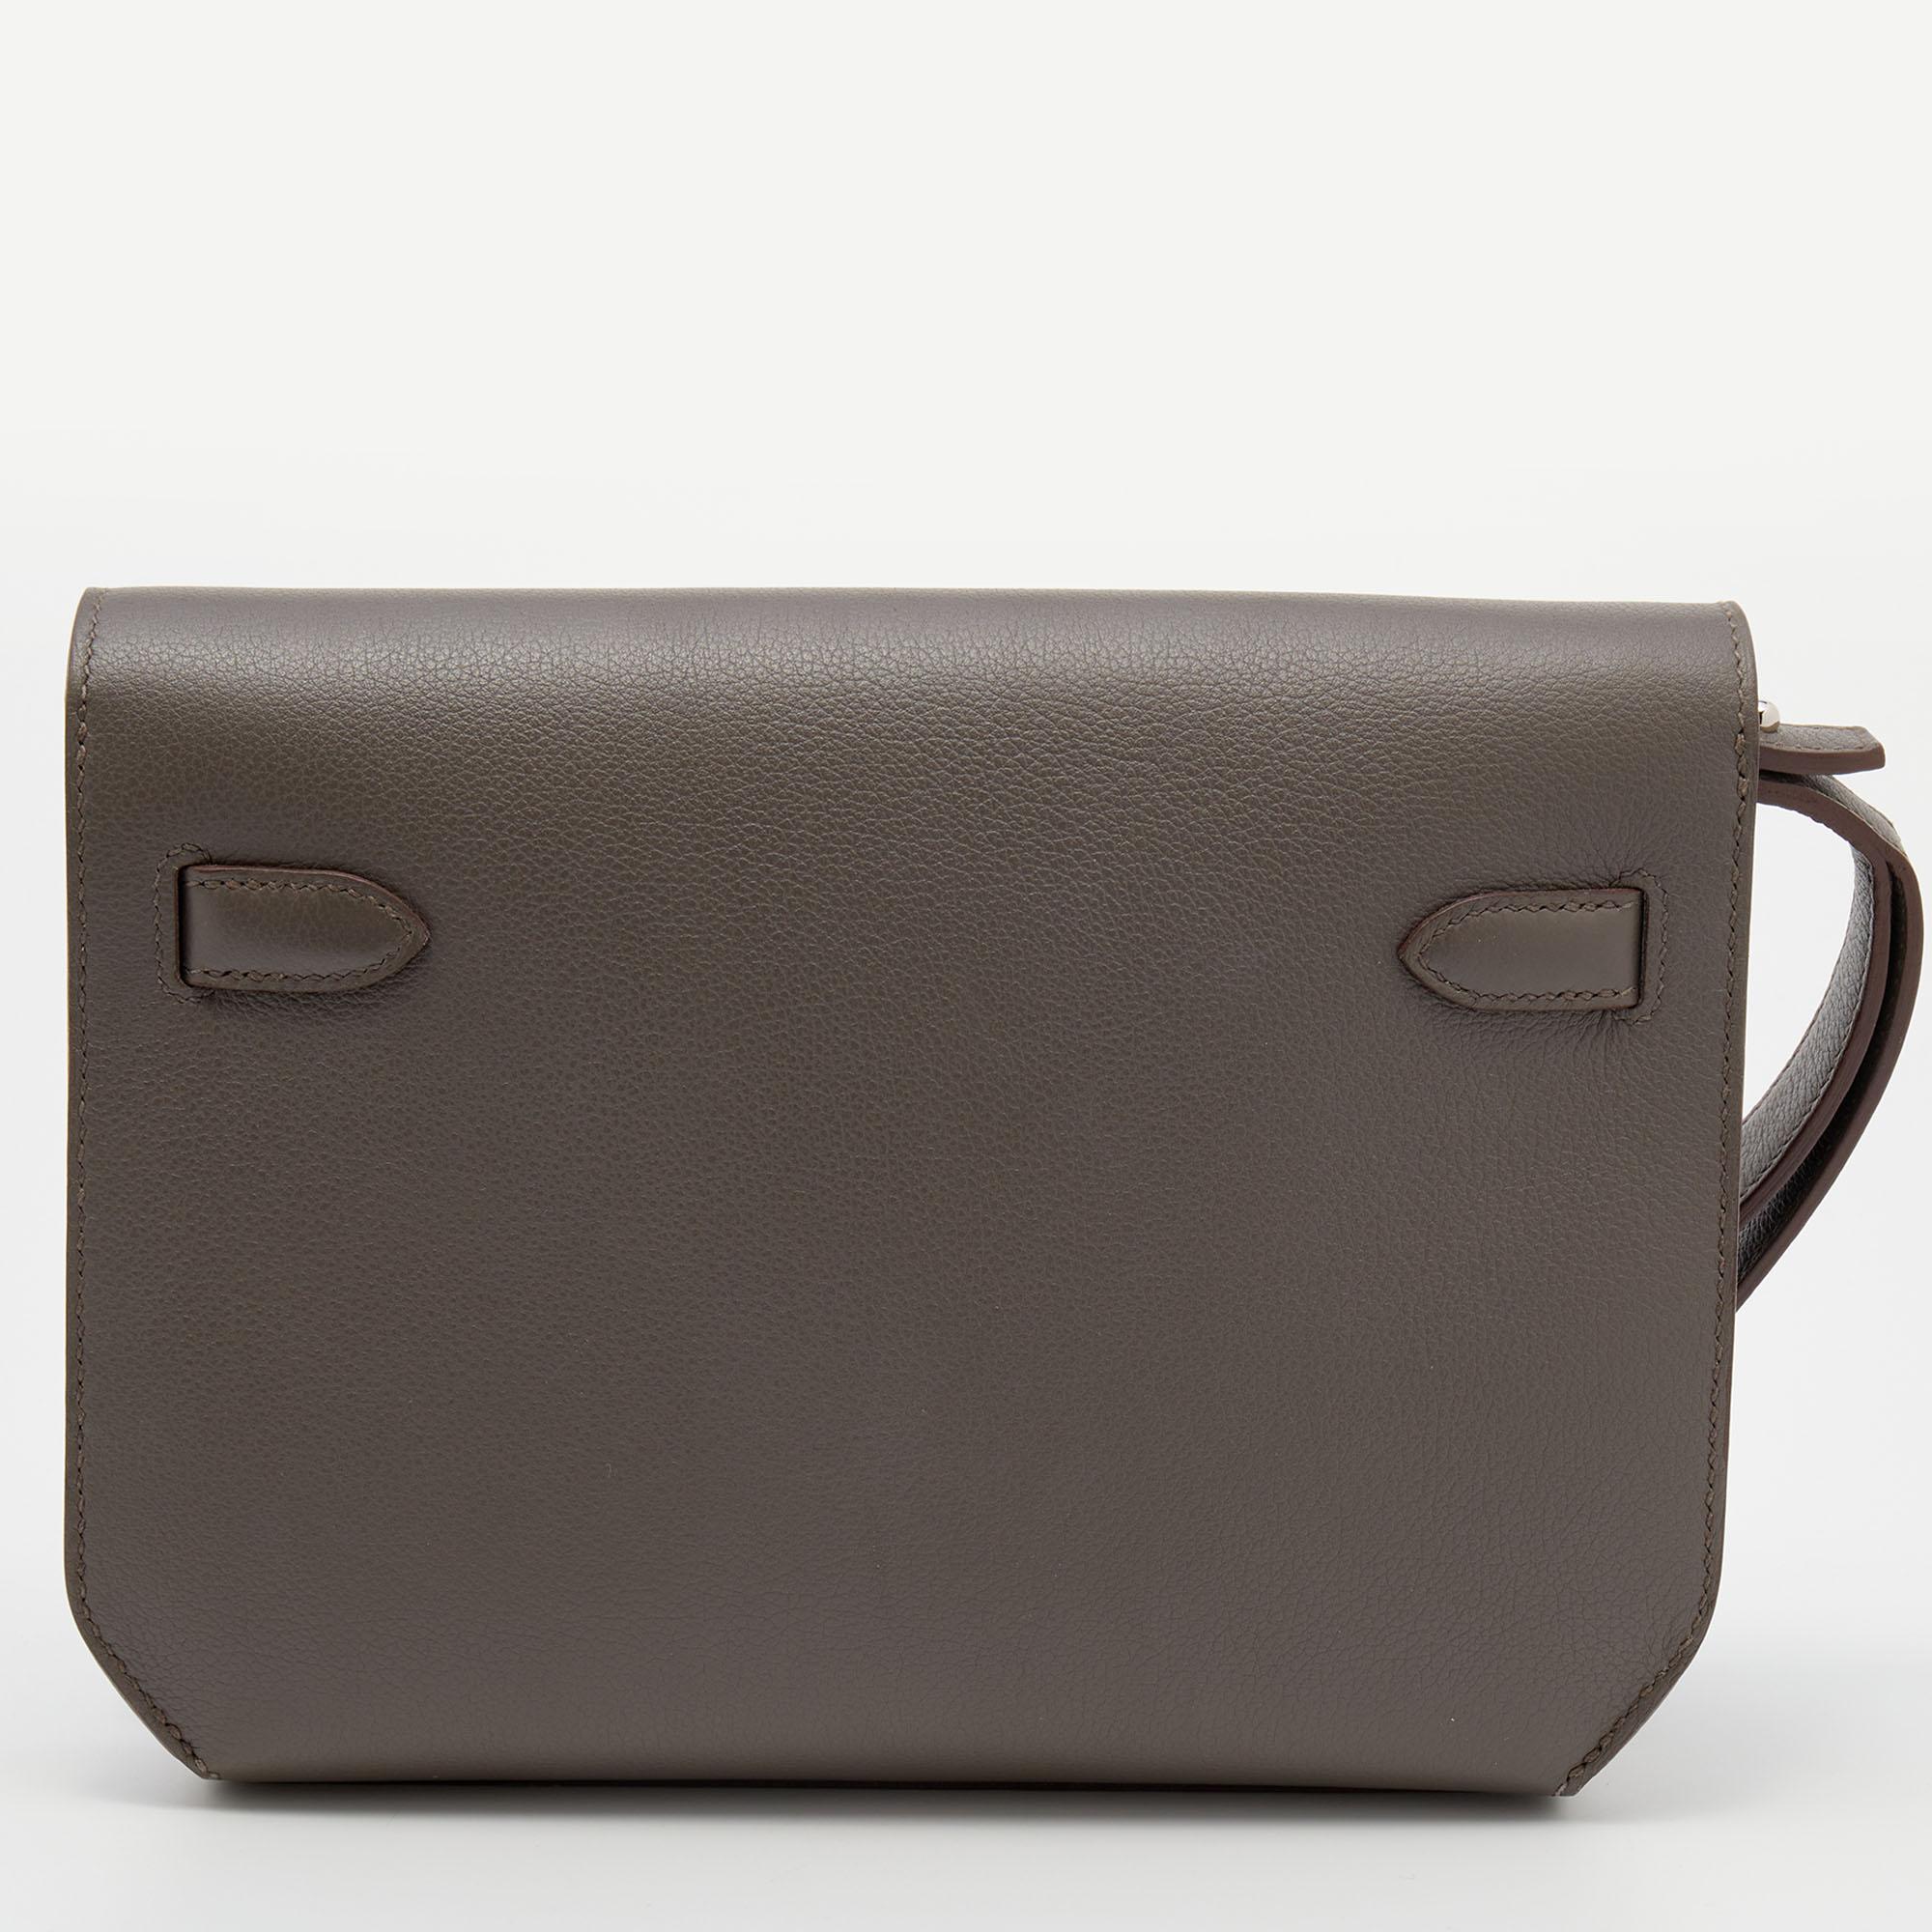 This Hermes Kelly Depeches 25 pouch can be elegantly carried in your hand or tucked under your arm. It is made using Etain Evercolor leather into a classy shape and elevated with a Kelly lock on the front. The interior is lined with